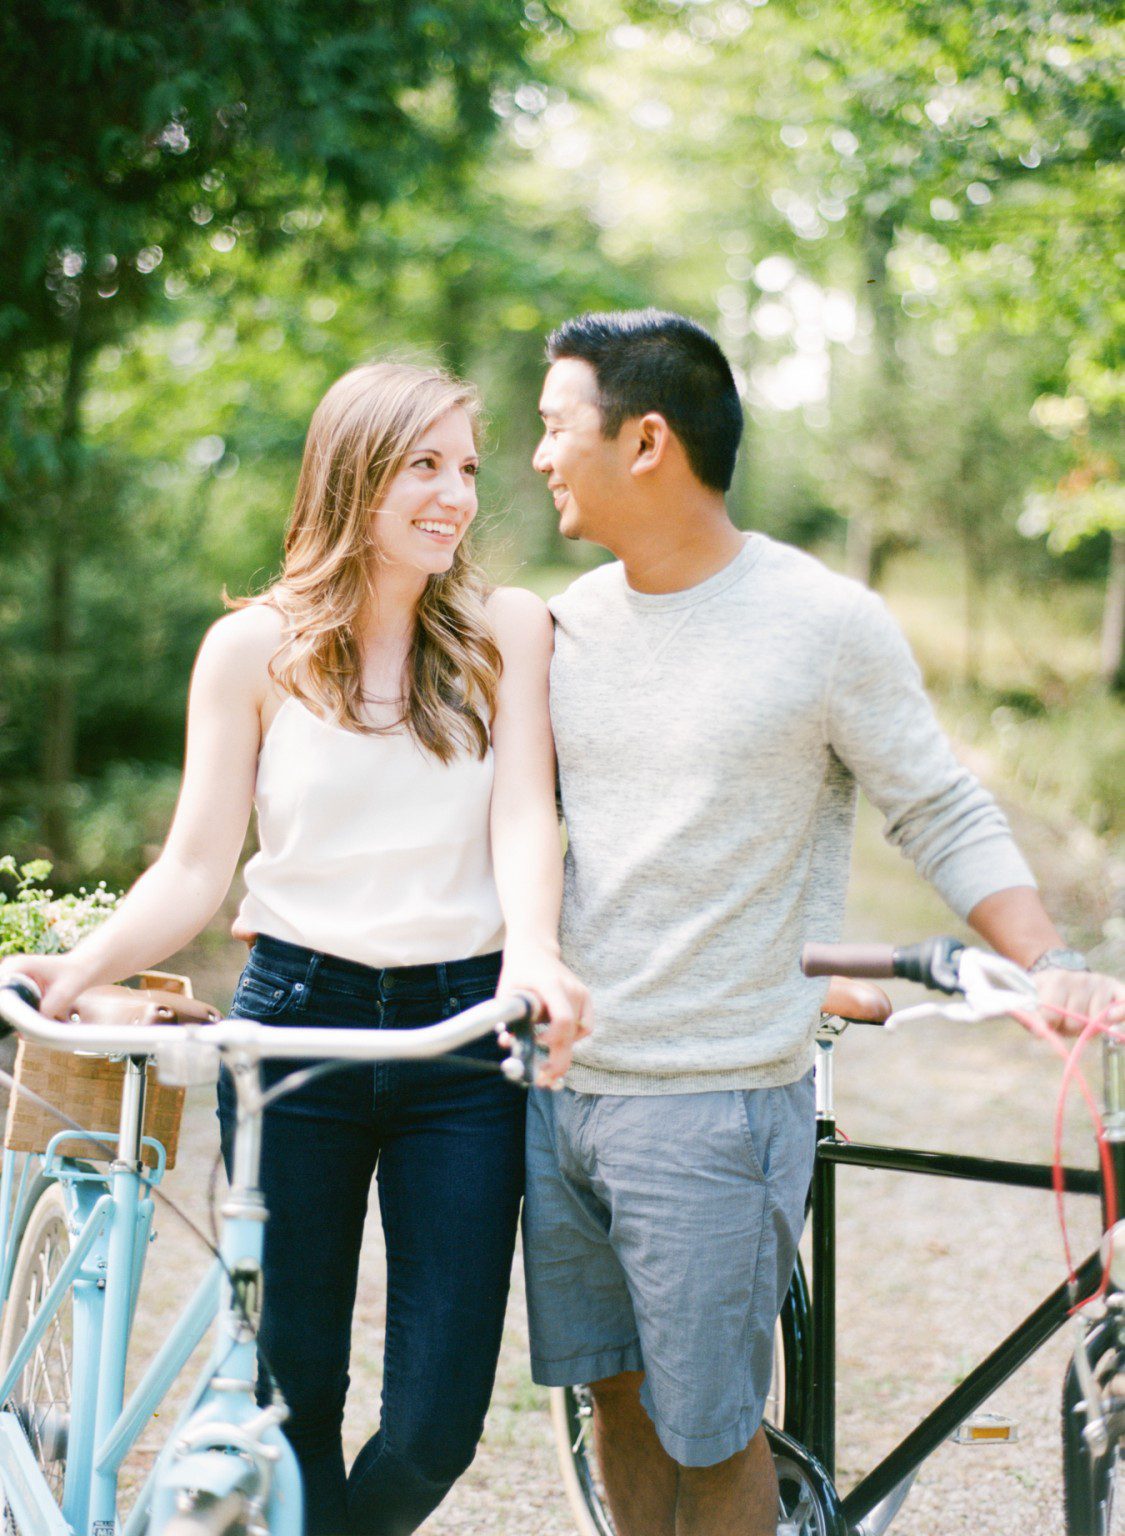 A northern michigan engagement photographer poses couple beside retro bikes